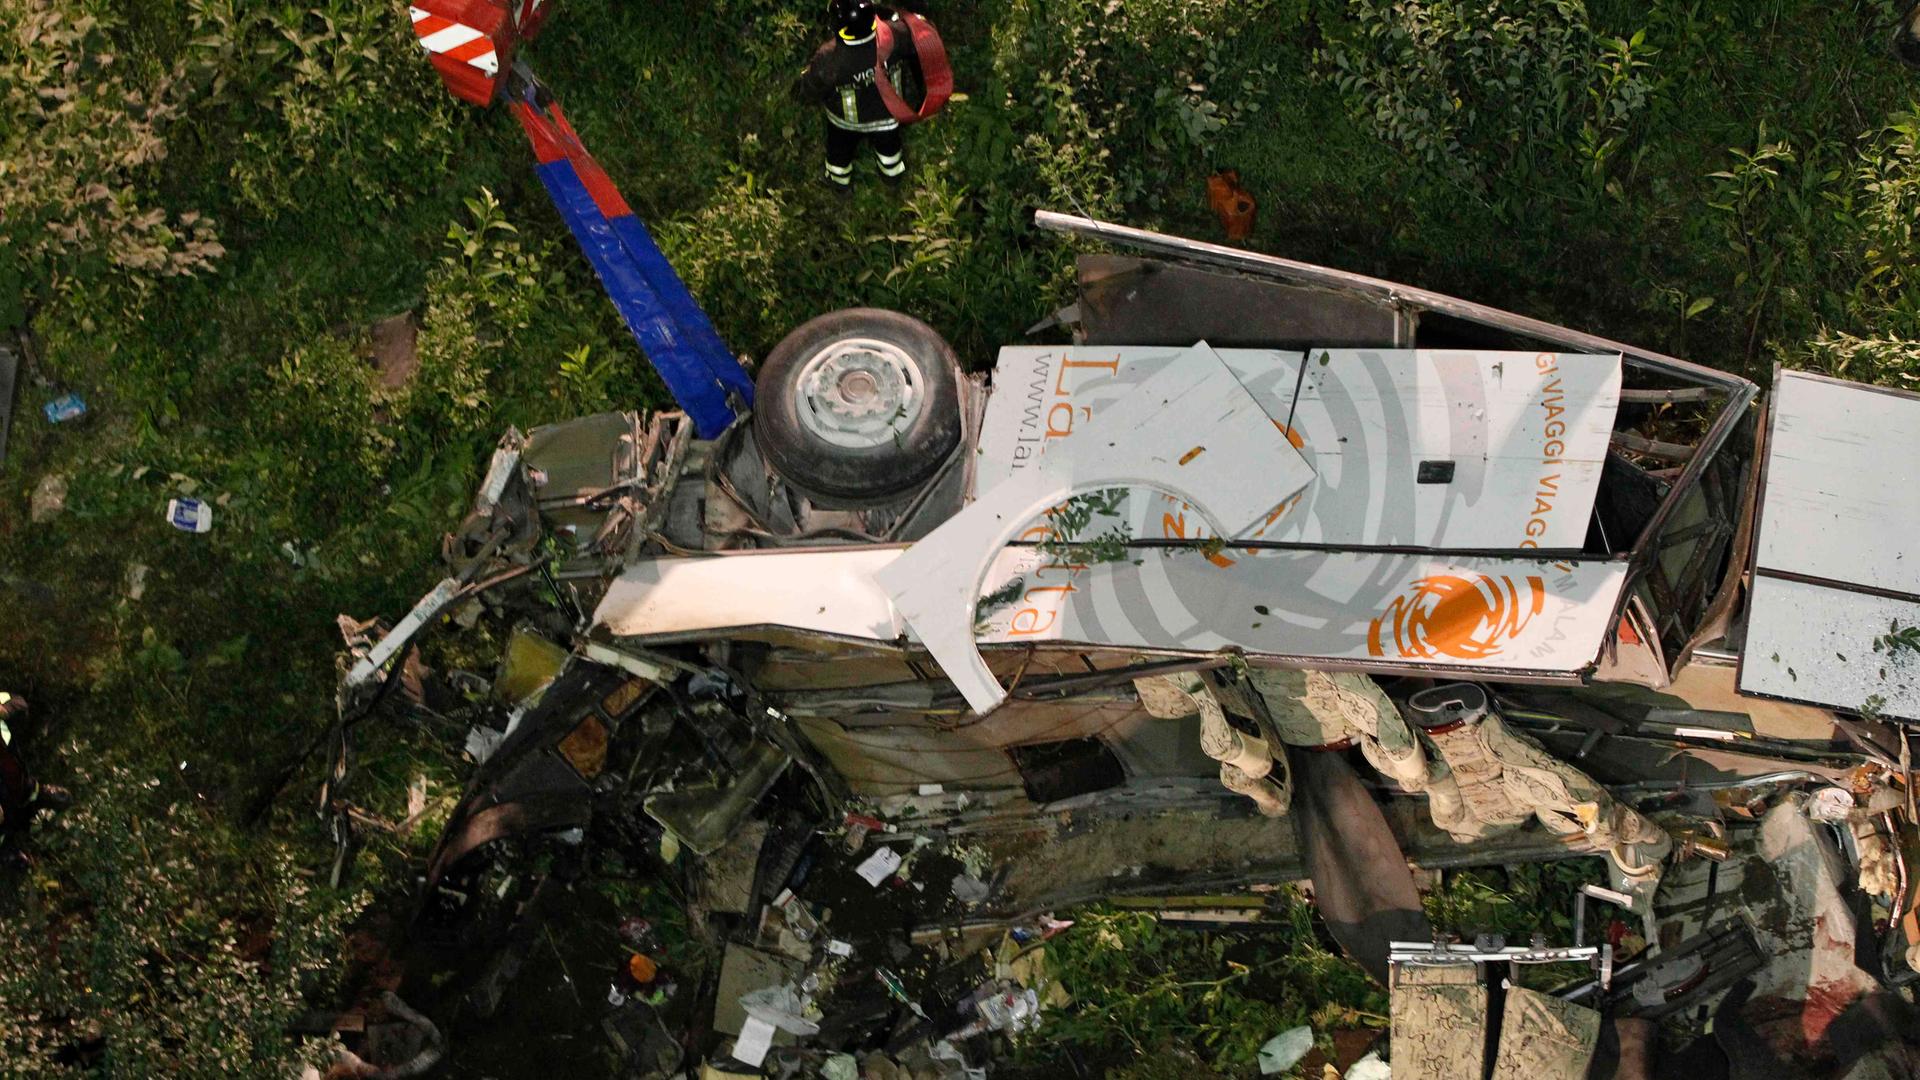 Avellino, July 29 - The death toll after the bus crash near Avellino reached 38 by 2:30 on Monday morning. One person on the list of participants in the tour was reported missing.Firemen worked until 4. a.m. to pull out 36 bodies from the bus that plunged